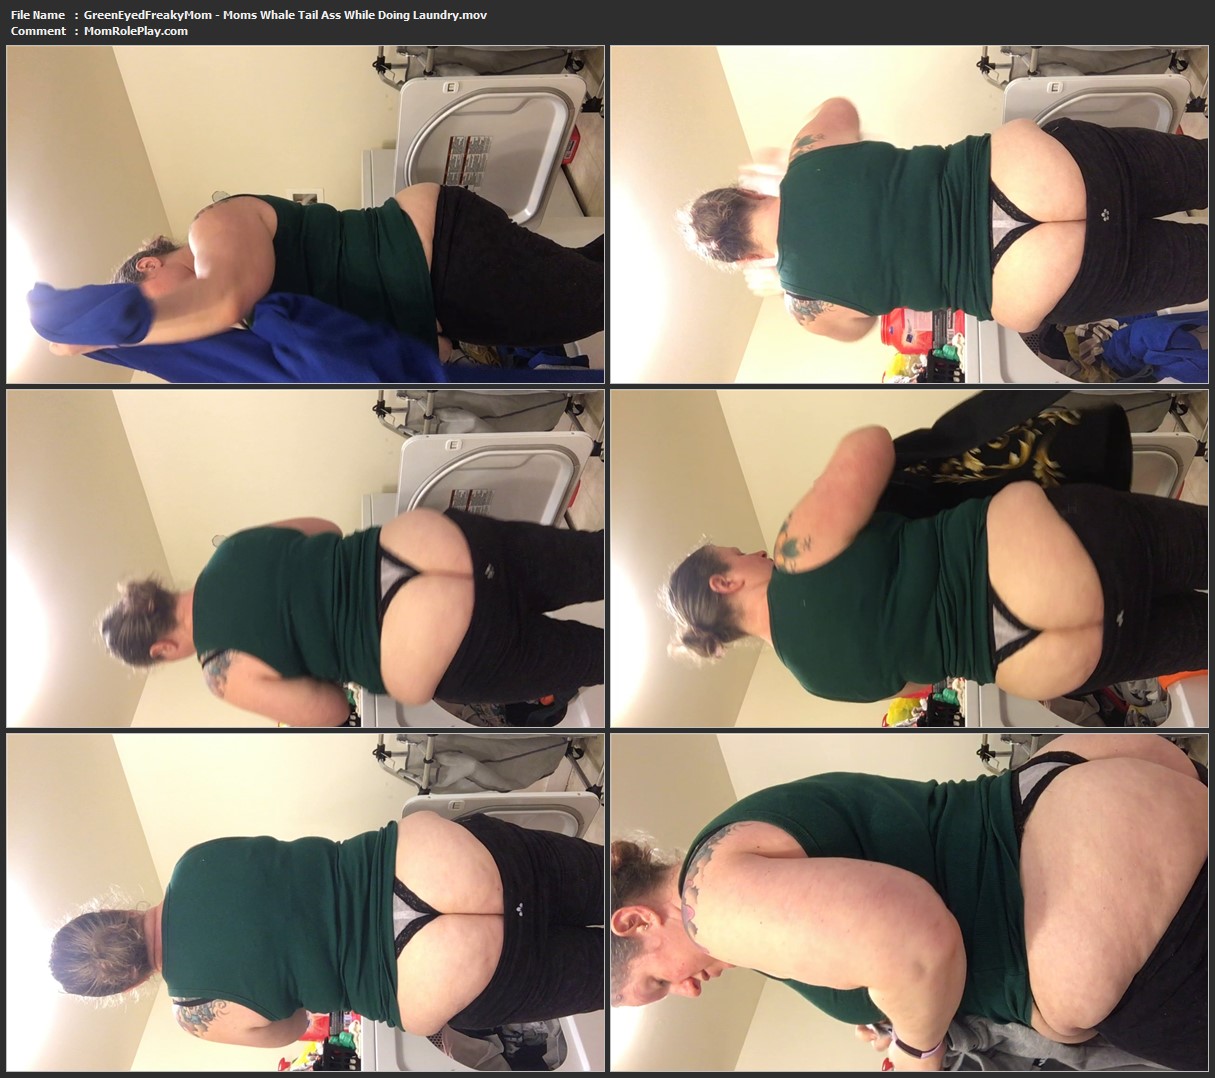 GreenEyedFreakyMom - Moms Whale Tail Ass While Doing Laundry